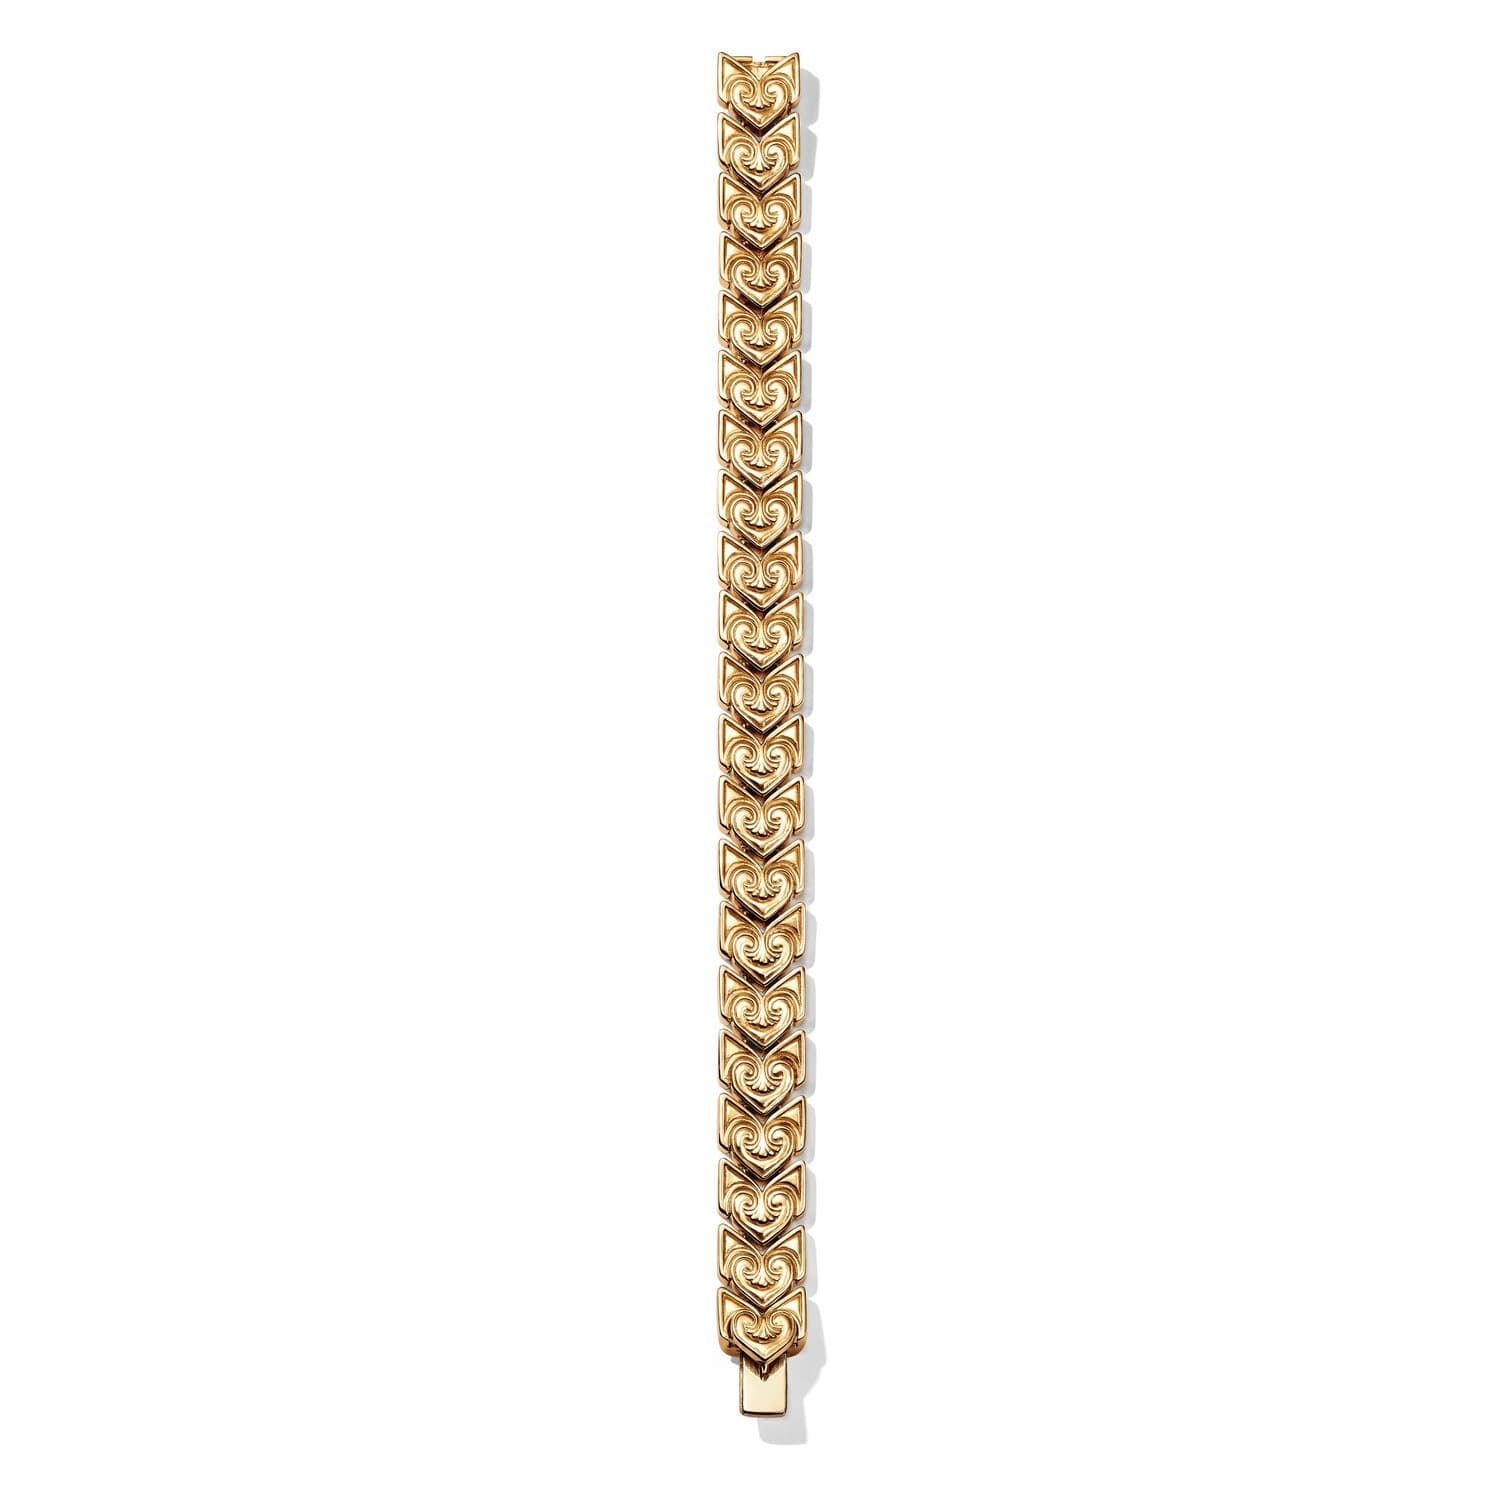 18kt Sustainable Gold Bracelet Handcrafted in NYC